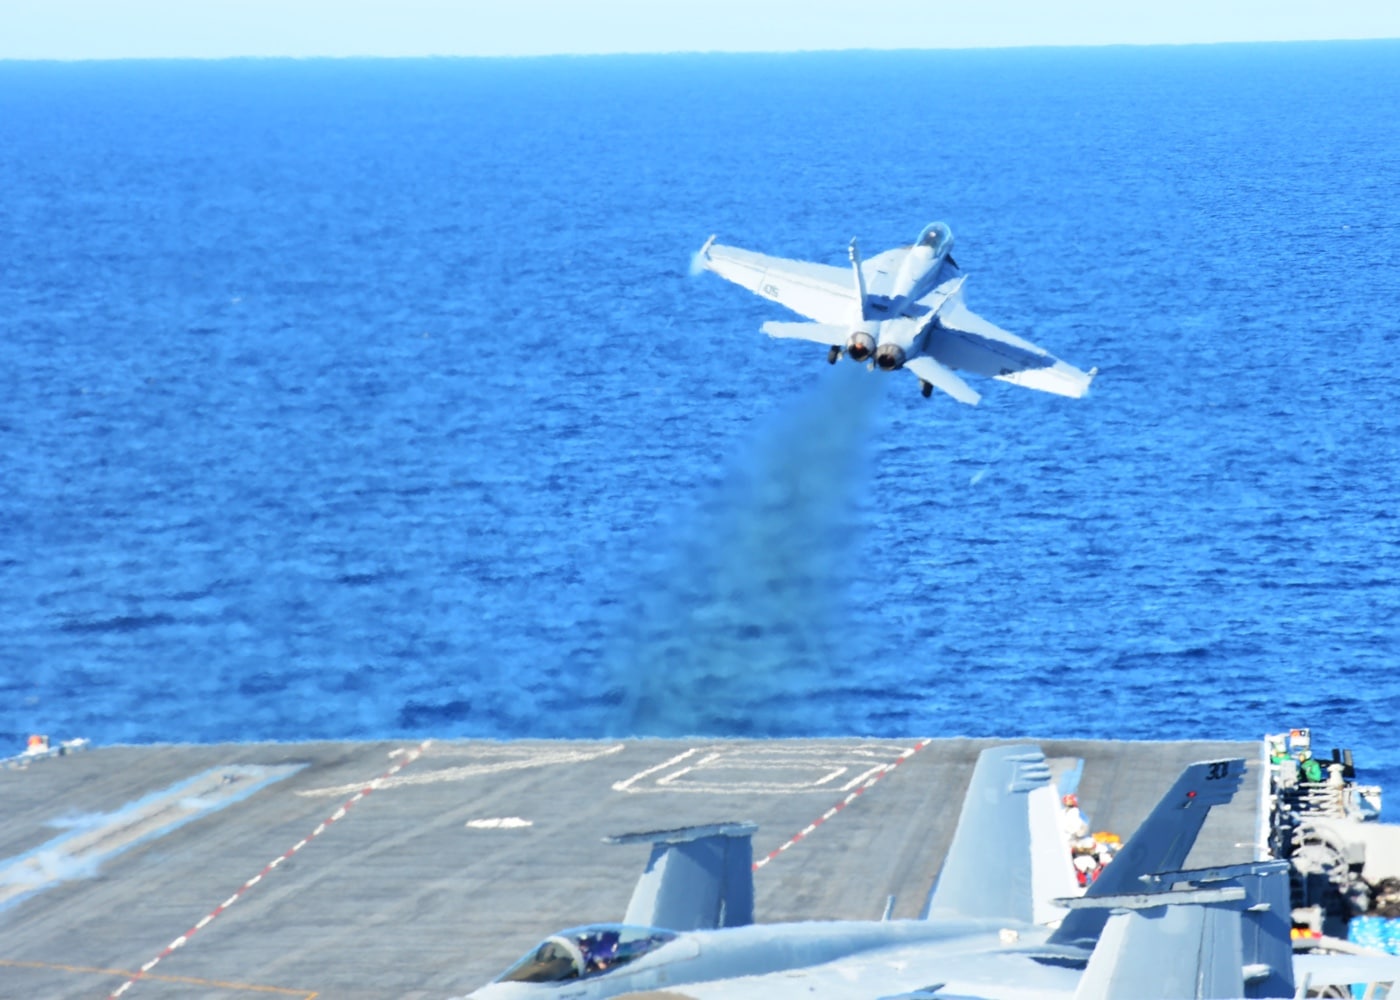 FA-18 Super Hornet launches from USS Ronald Reagan